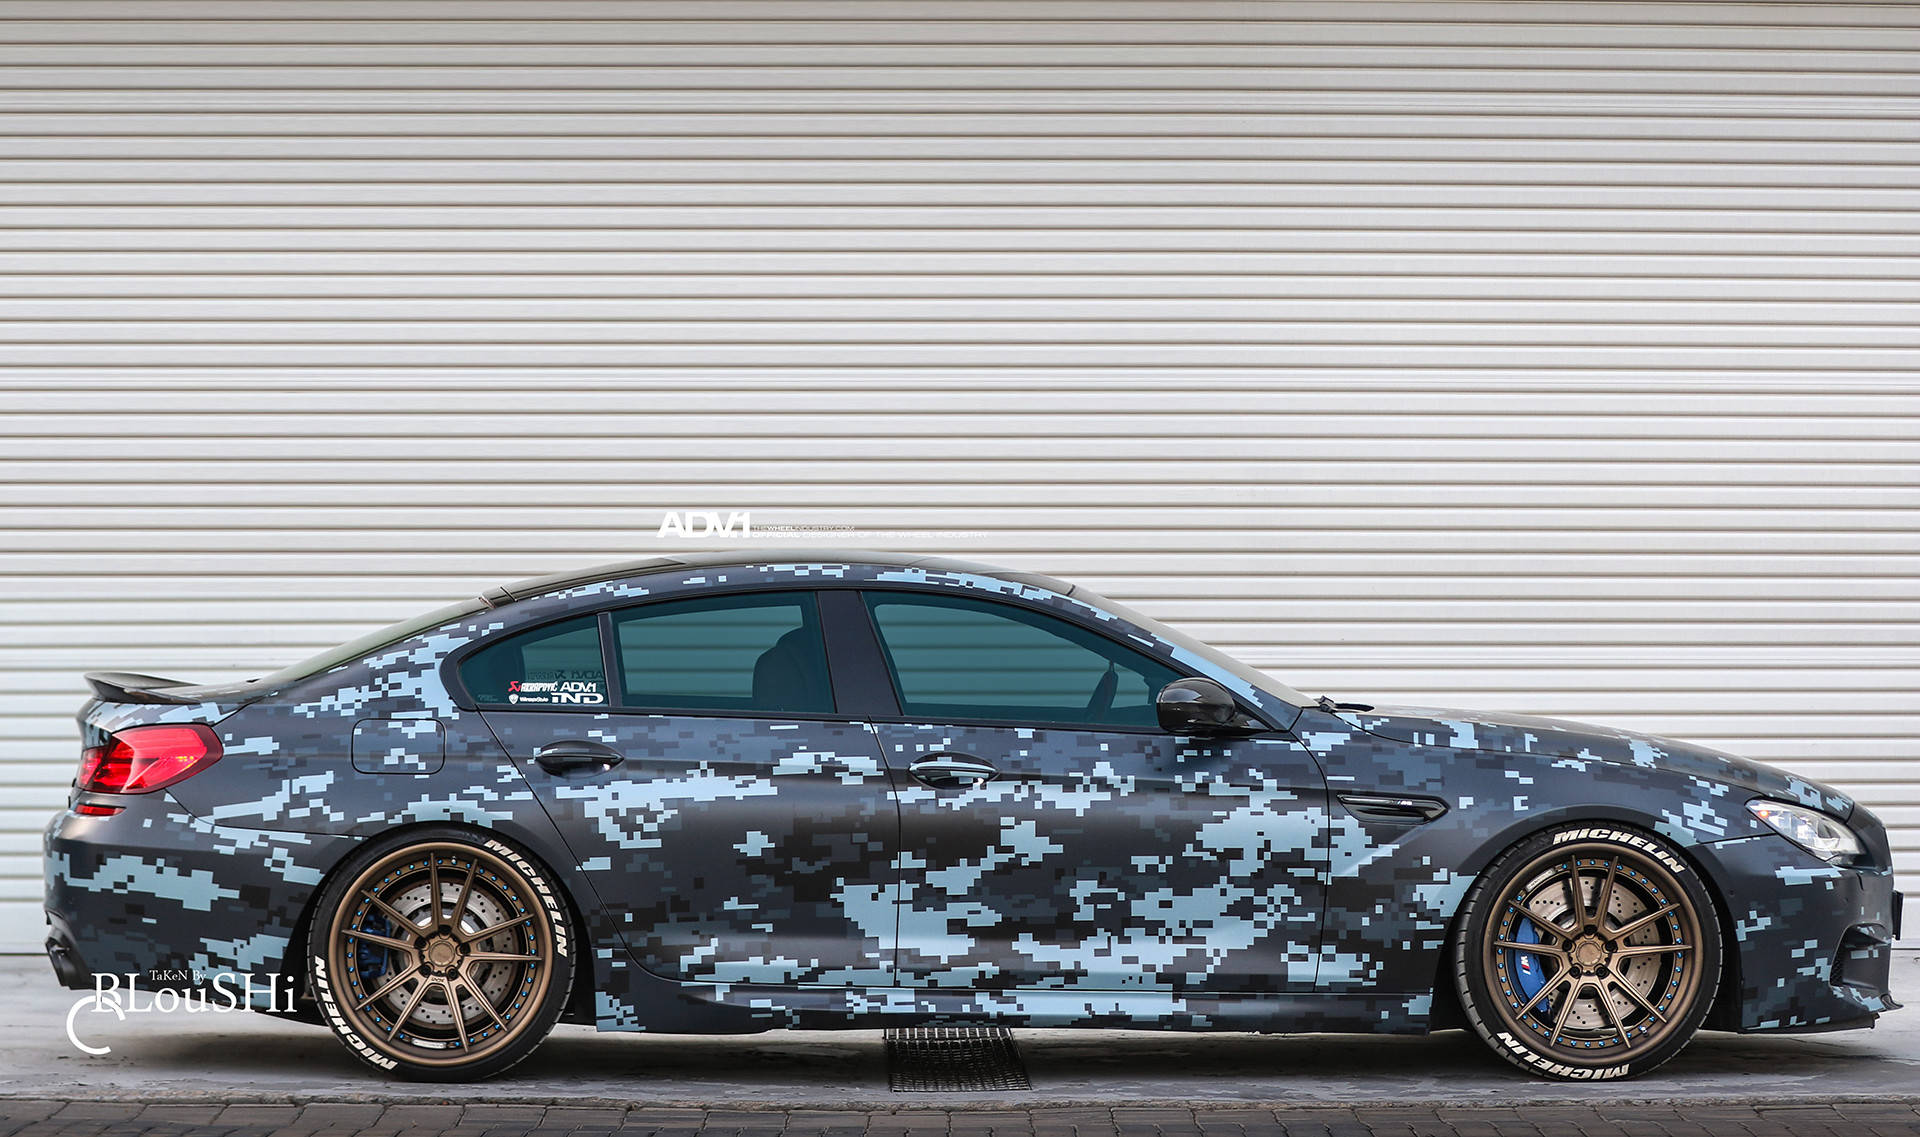 Stealthy Sophistication In The Black Camouflaged Bmw M5